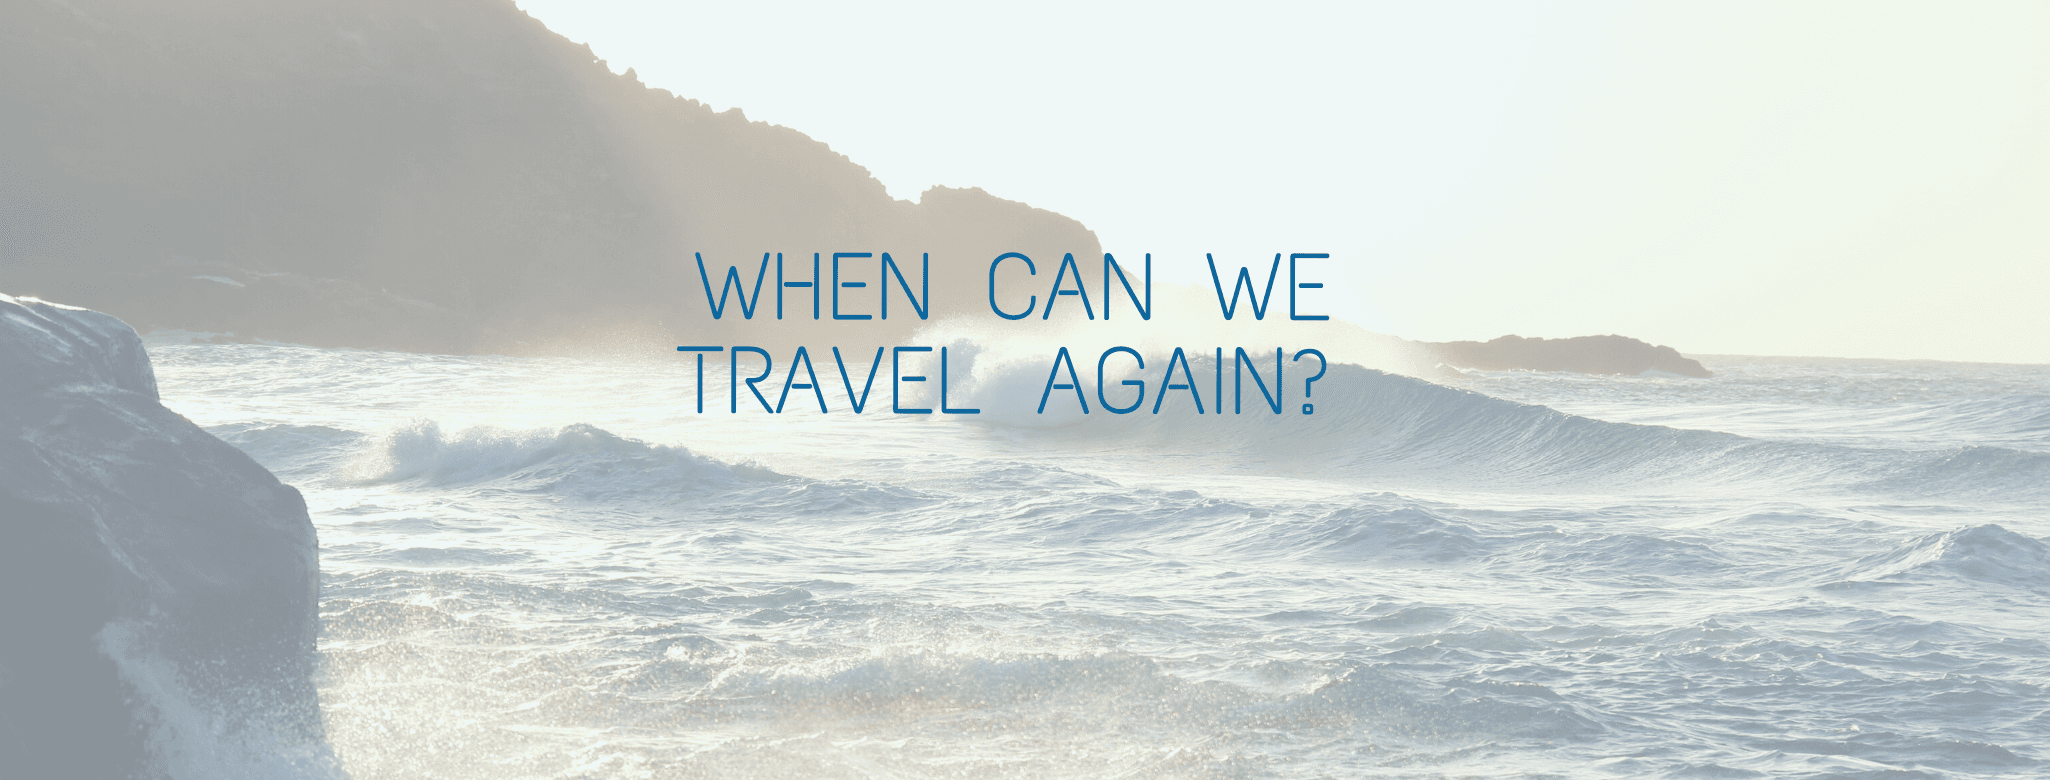 When Can We Travel Again...? - background banner